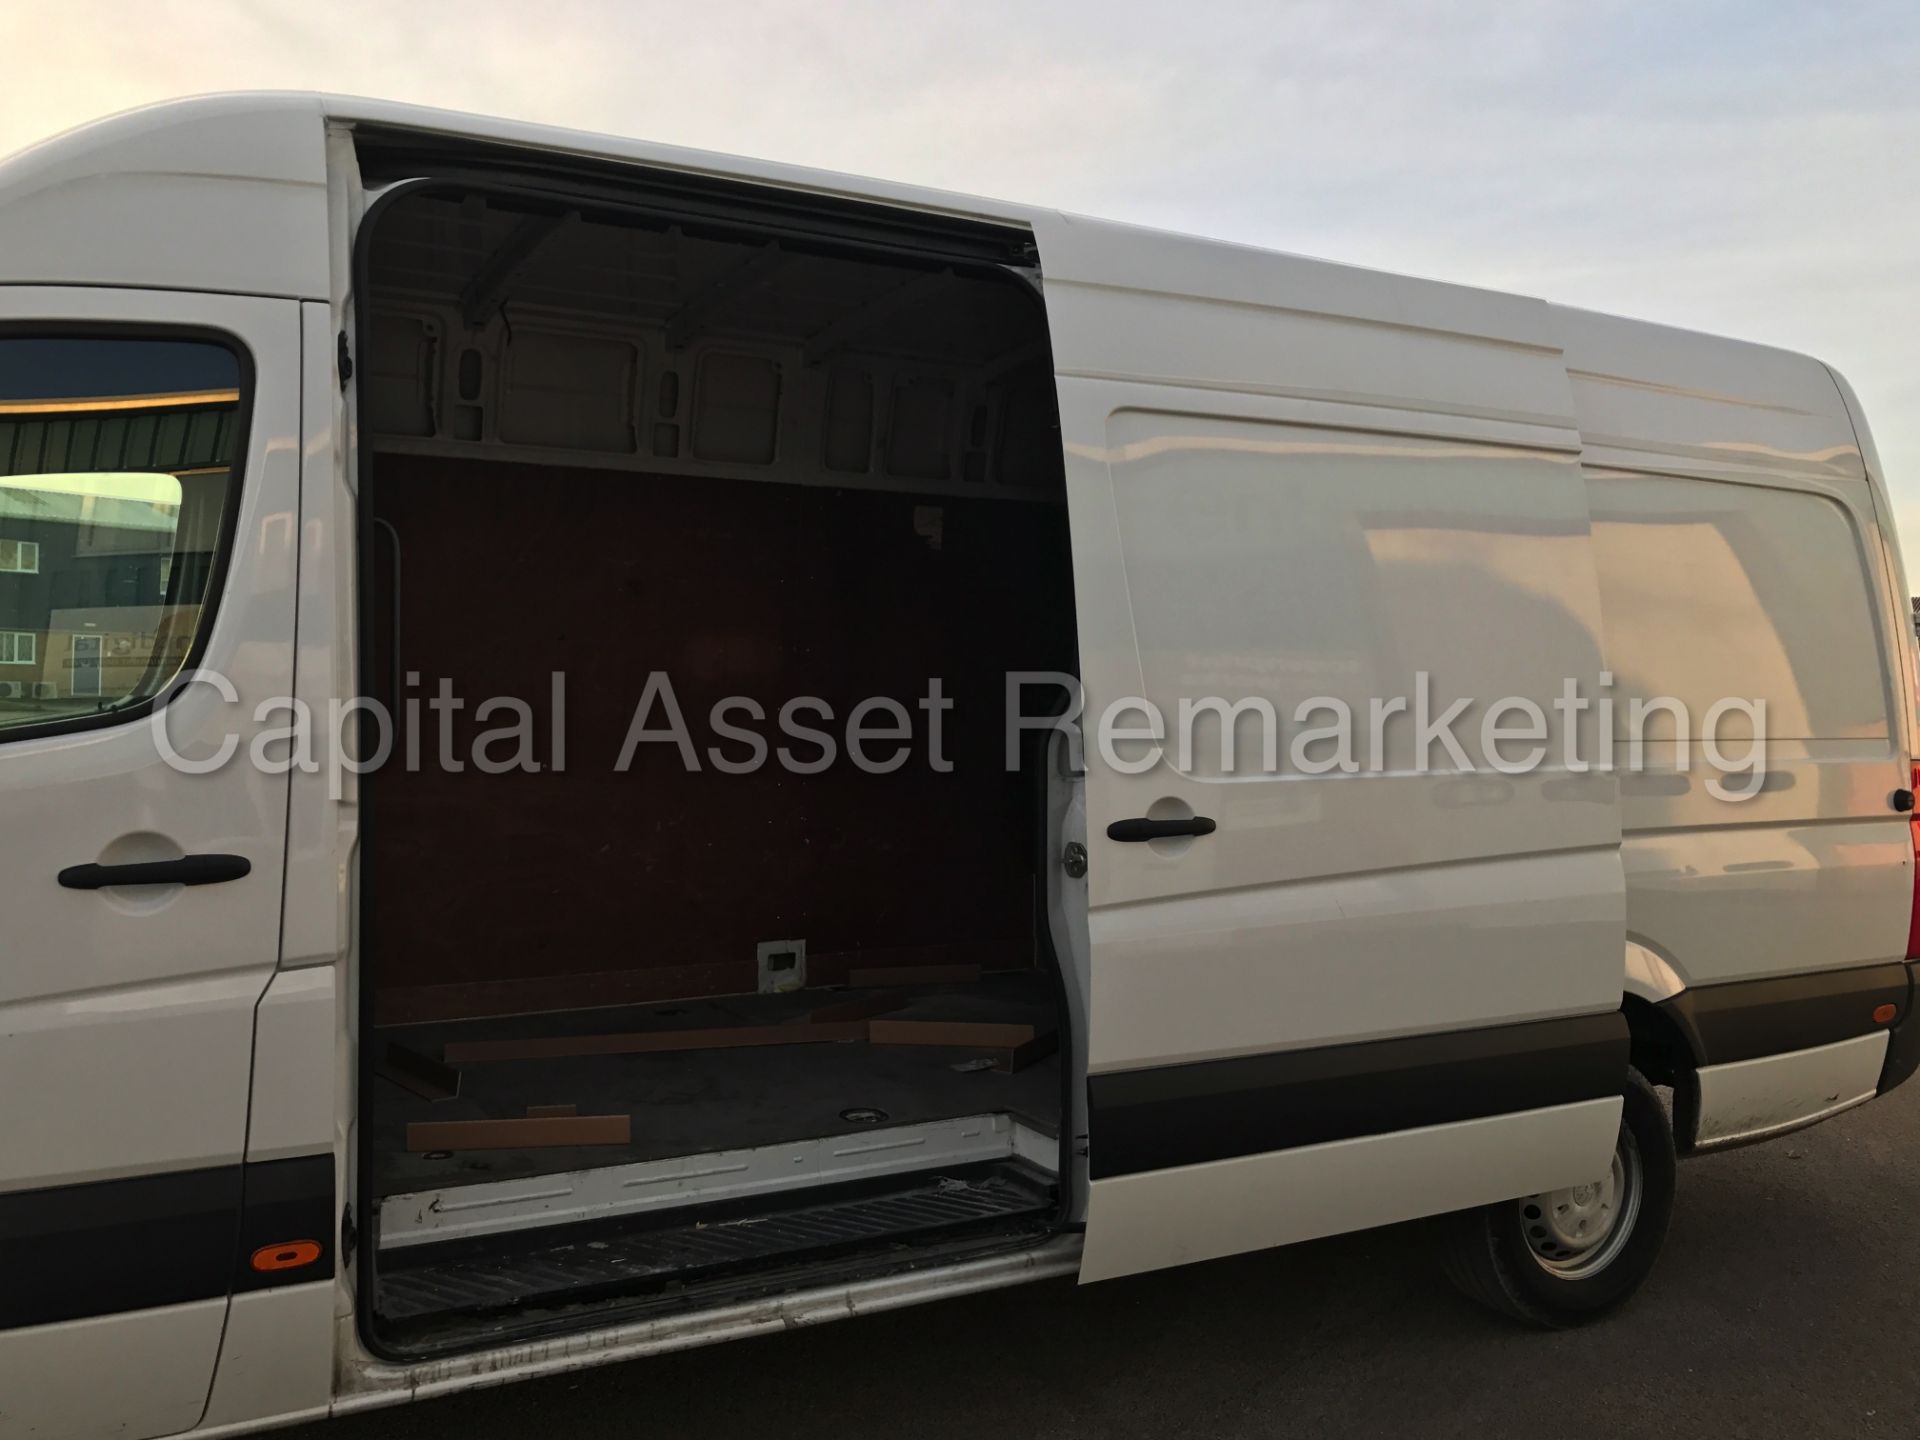 VOLKSWAGEN CRAFTER CR35 'LWB HI-ROOF' (2015 MODEL) '2.0 TDI - 163 PS - 6 SPEED' (1 COMPANY OWNER) - Image 11 of 23